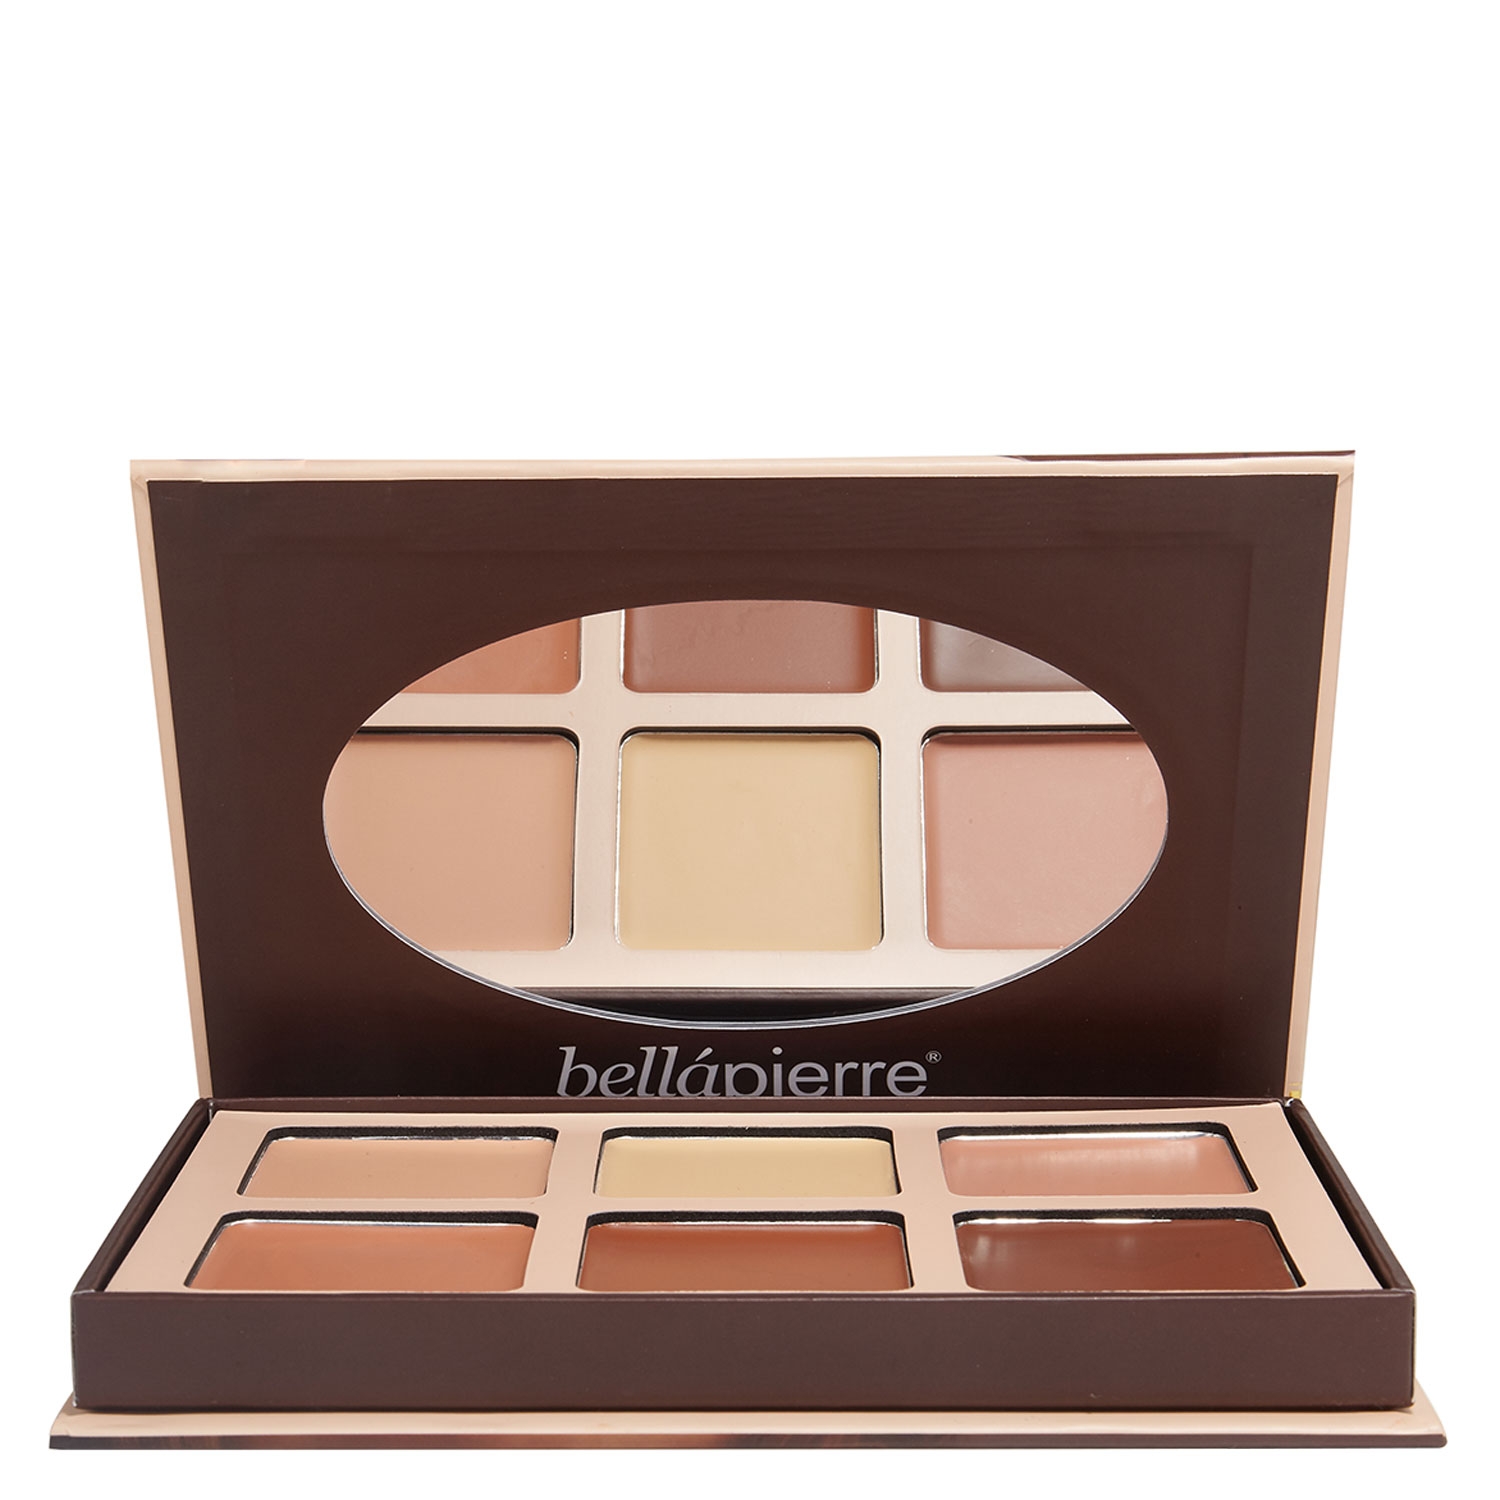 Product image from bellapierre Teint - Contour & Highlight Cream Palette